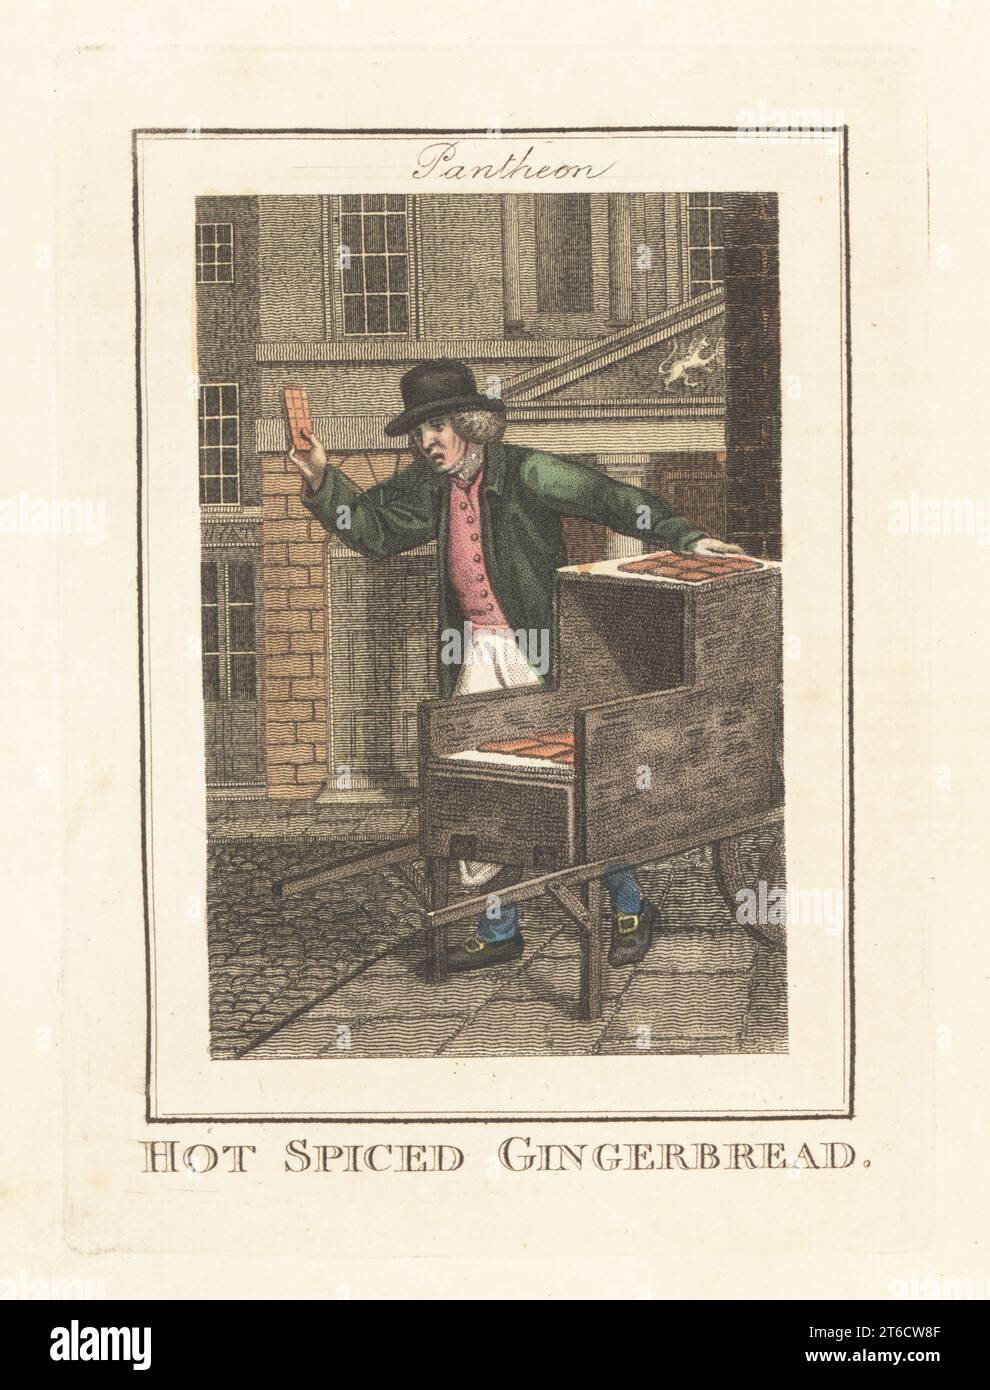 Gingerbread seller in front of the Pantheon, London, 1805. In bowler hat, coat and waistcoat, selling flat cakes of hot spiced gingerbread from a barrow. In front of the Pantheon on Oxford Street, a hall used for music concerts and masquerade balls. Handcoloured copperplate engraving by Edward Edwards after an illustration by William Marshall Craig from Description of the Plates Representing the Itinerant Traders of London, Richard Phillips, No. 71 St Pauls Churchyard, London, 1805. Stock Photo